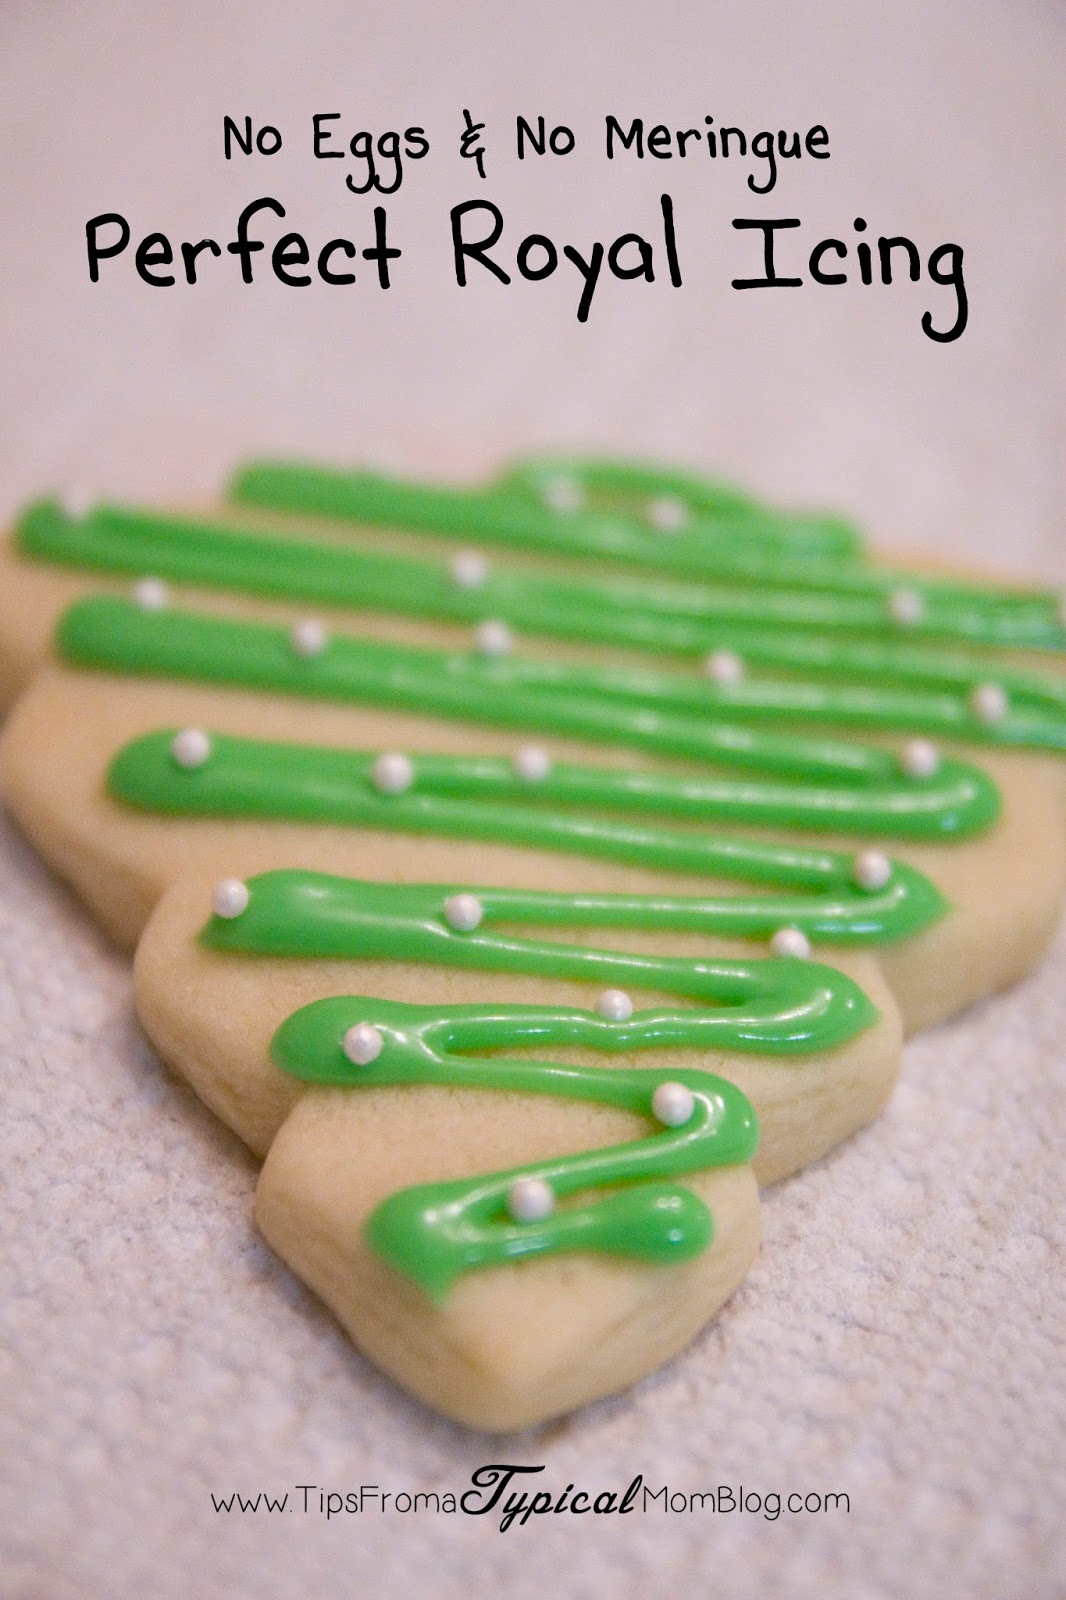 Royal Icing Without Egg Whites Or Meringue Powder Tips From A Typical Mom